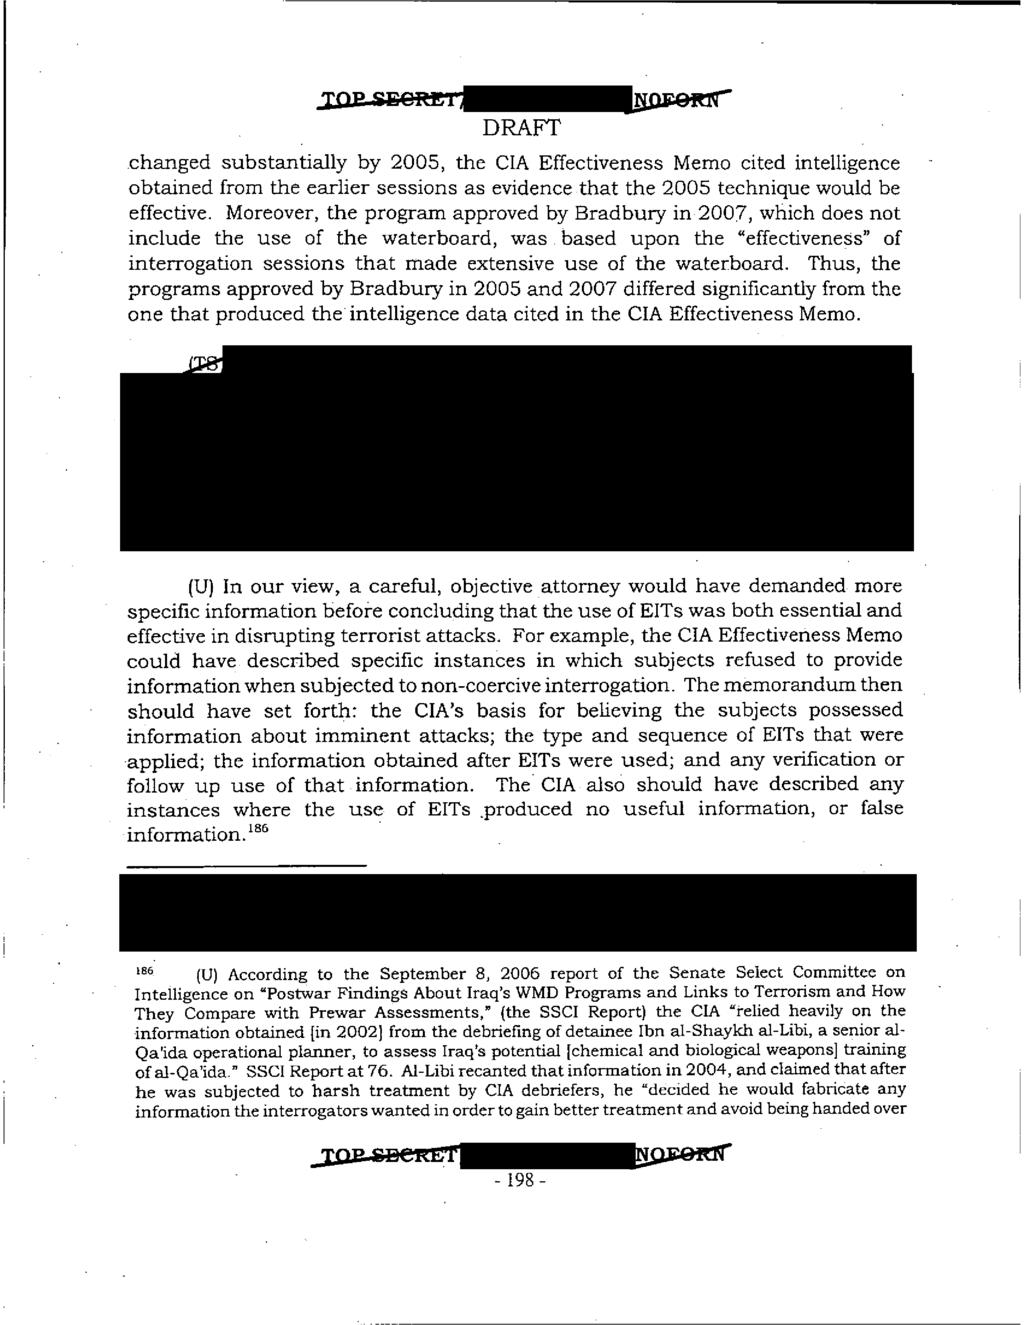 -T-OR-SFreW DRAFT changed substantially by 2005, the CIA Effectiveness Memo cited intelligence obtained from the earlier sessions as evidence that the 2005 technique would be effective.